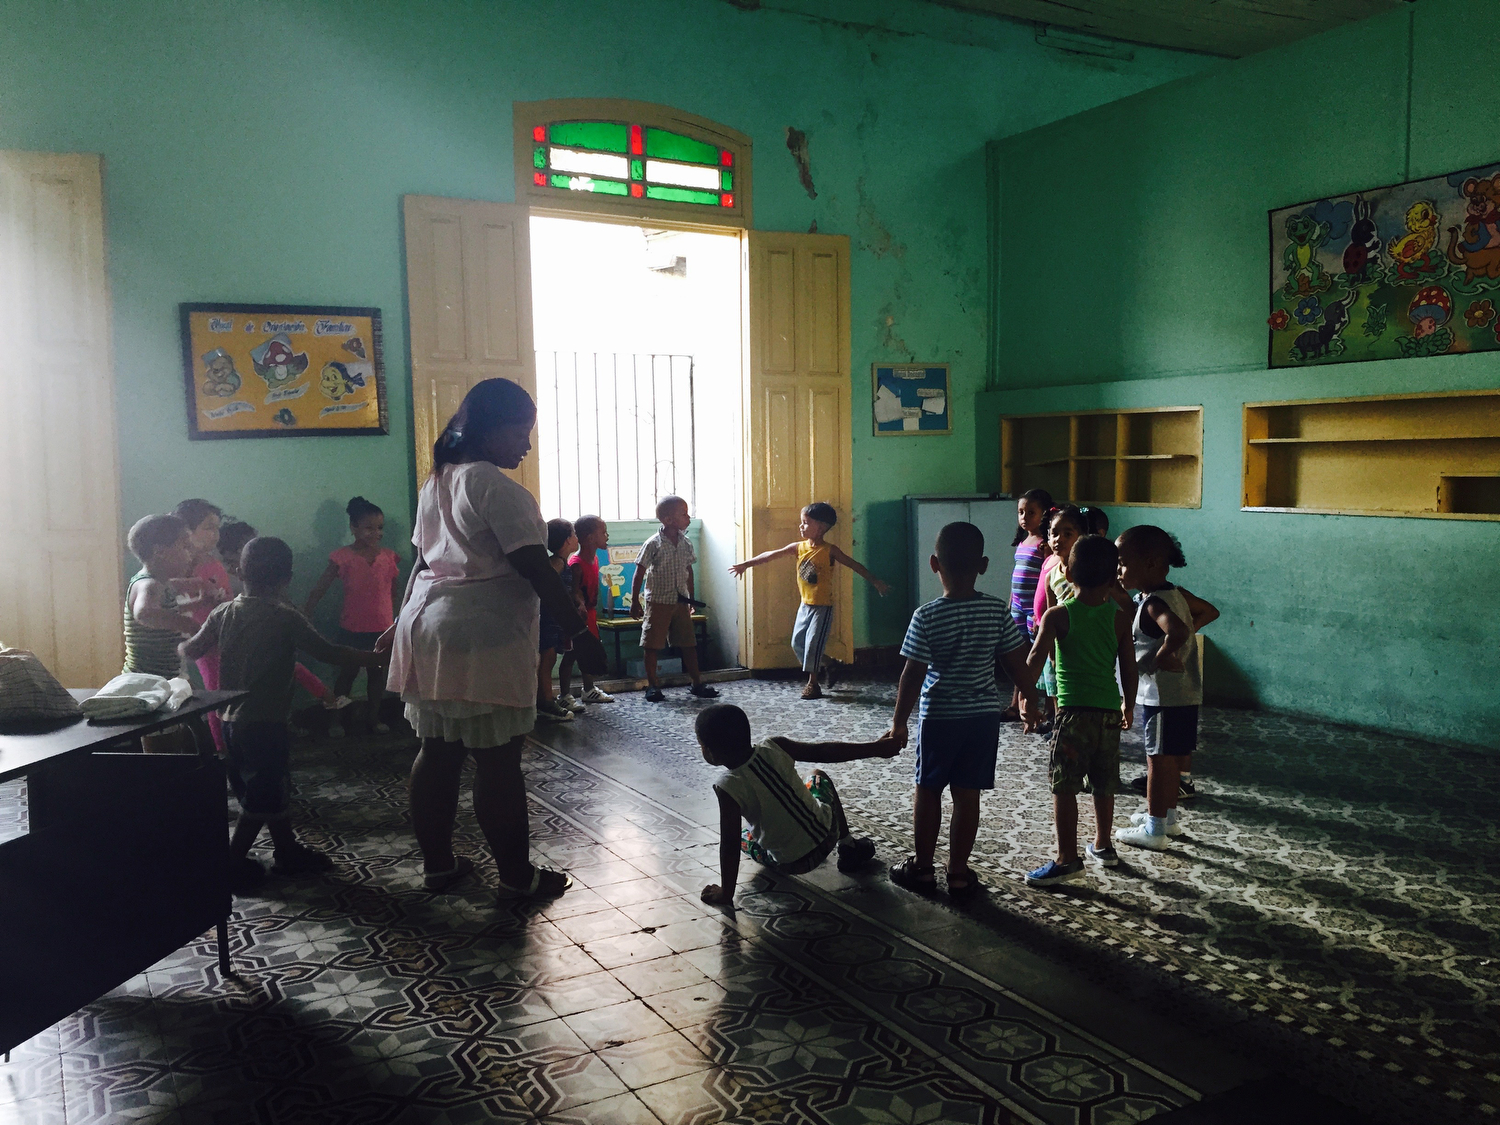  School is held inside a former mansion in Santiago de Cuba, where the wealthy were forced out years ago under the hand of Castro.  